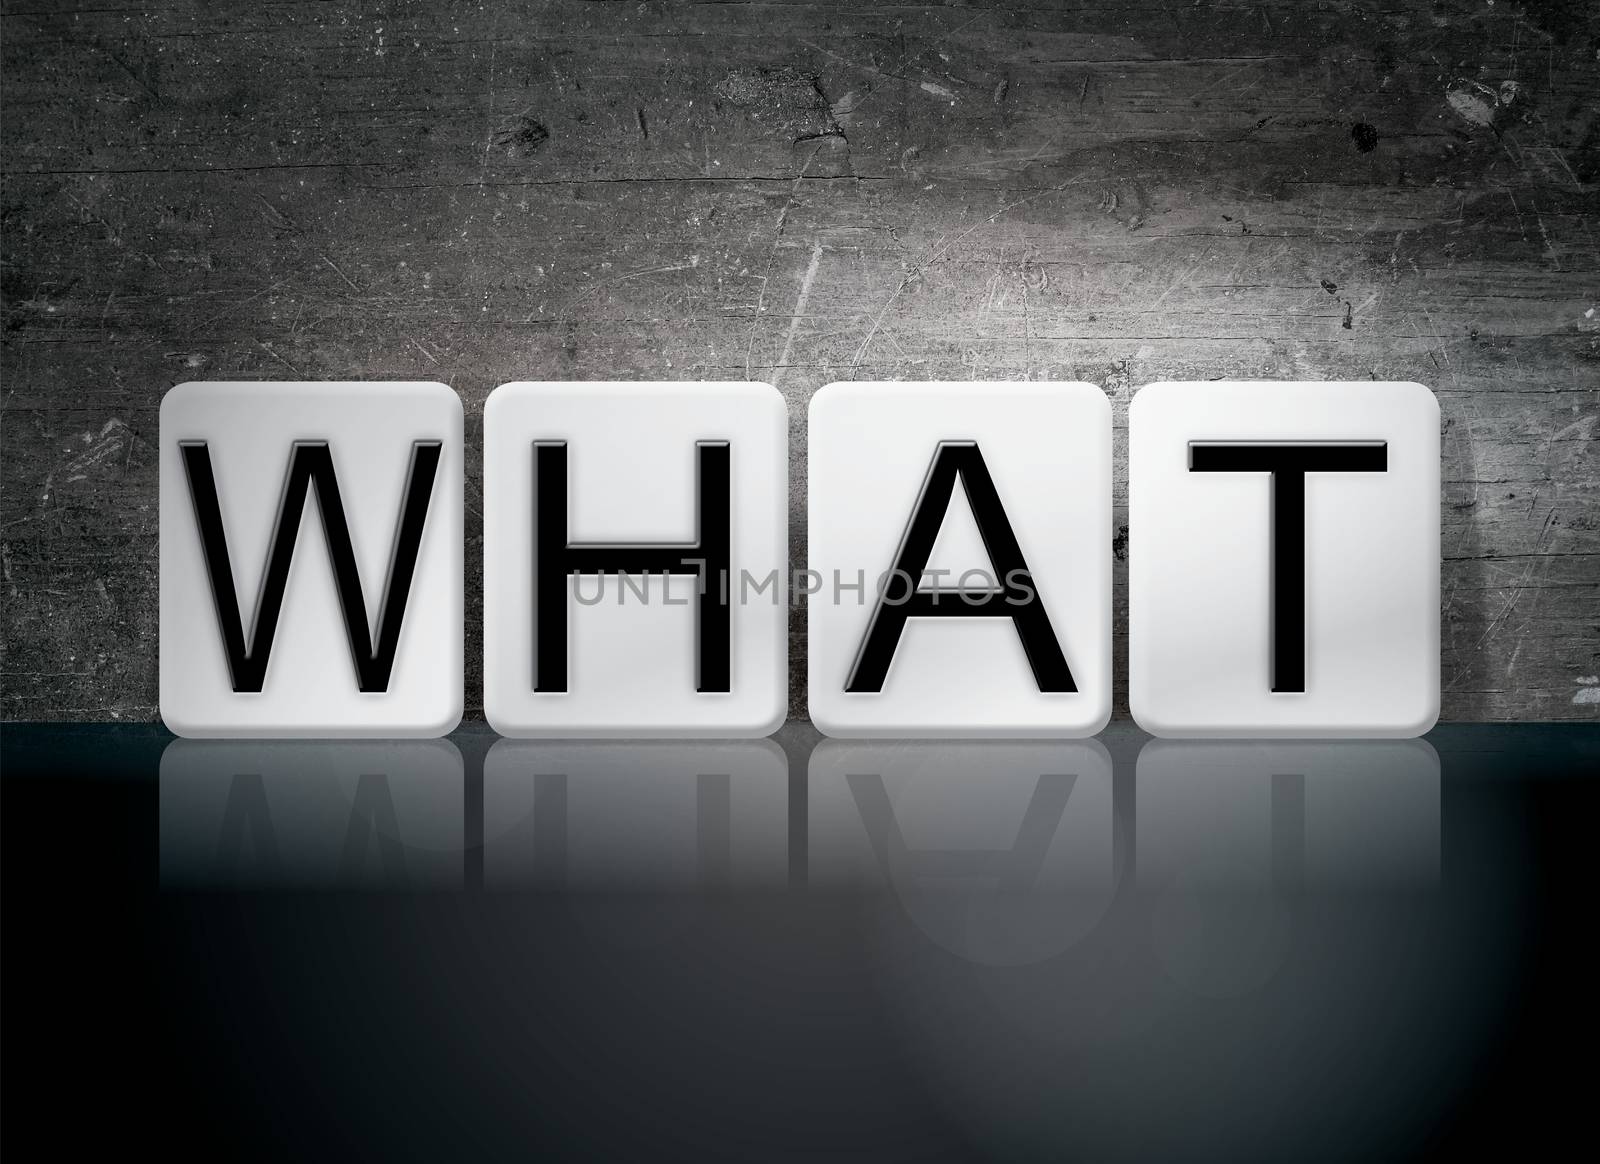 The word "What" written in white tiles against a dark vintage grunge background.